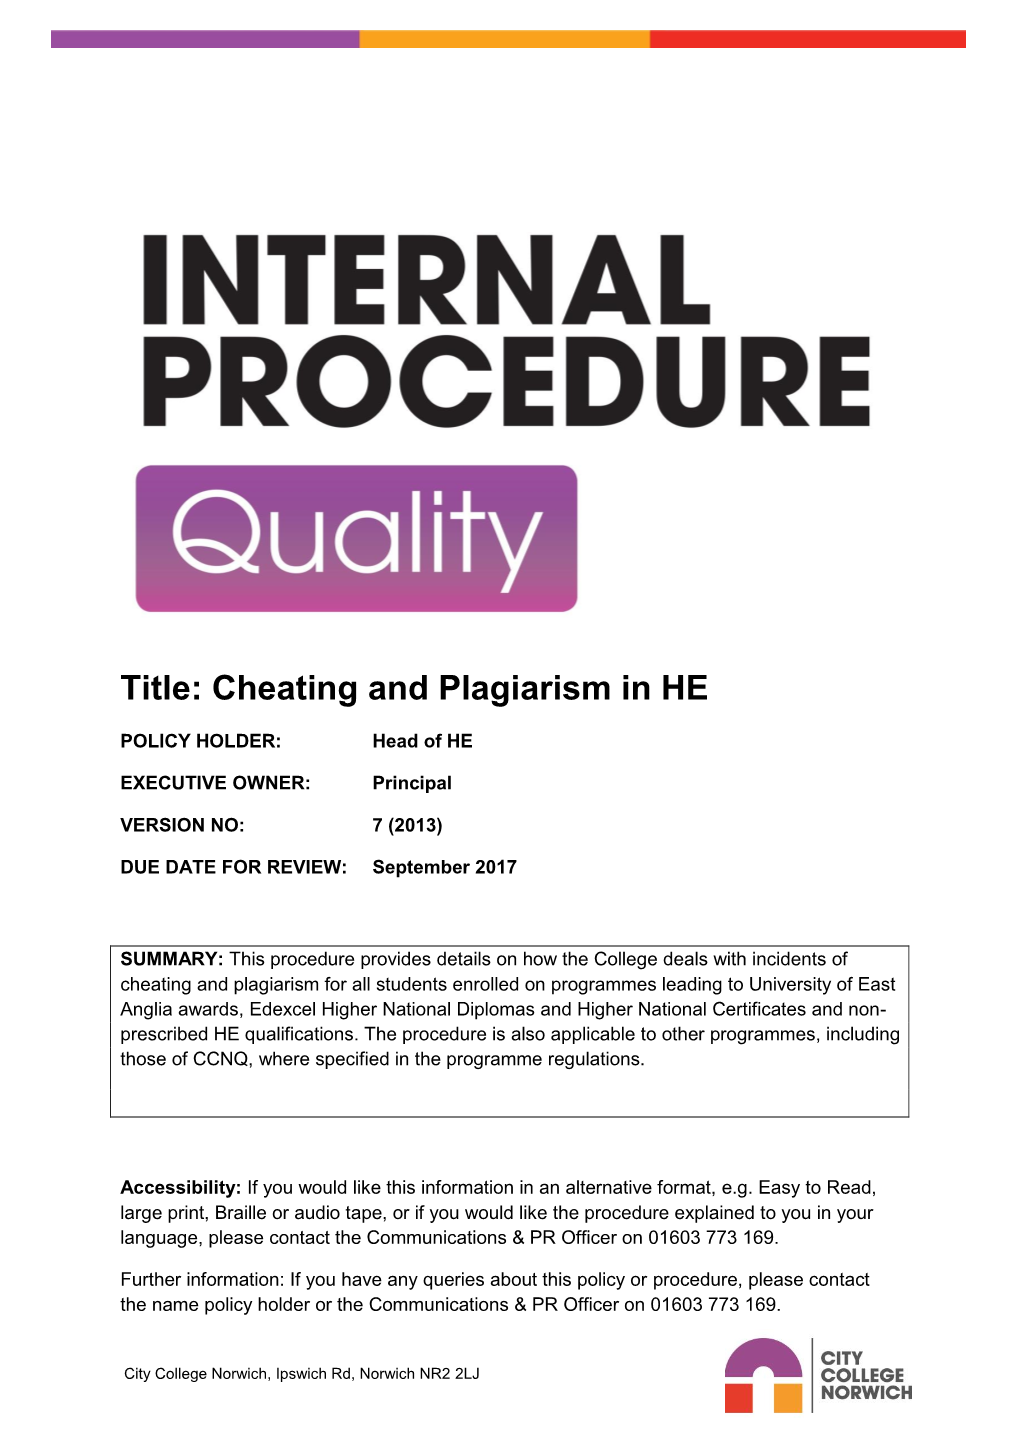 Title: Cheating and Plagiarism in HE